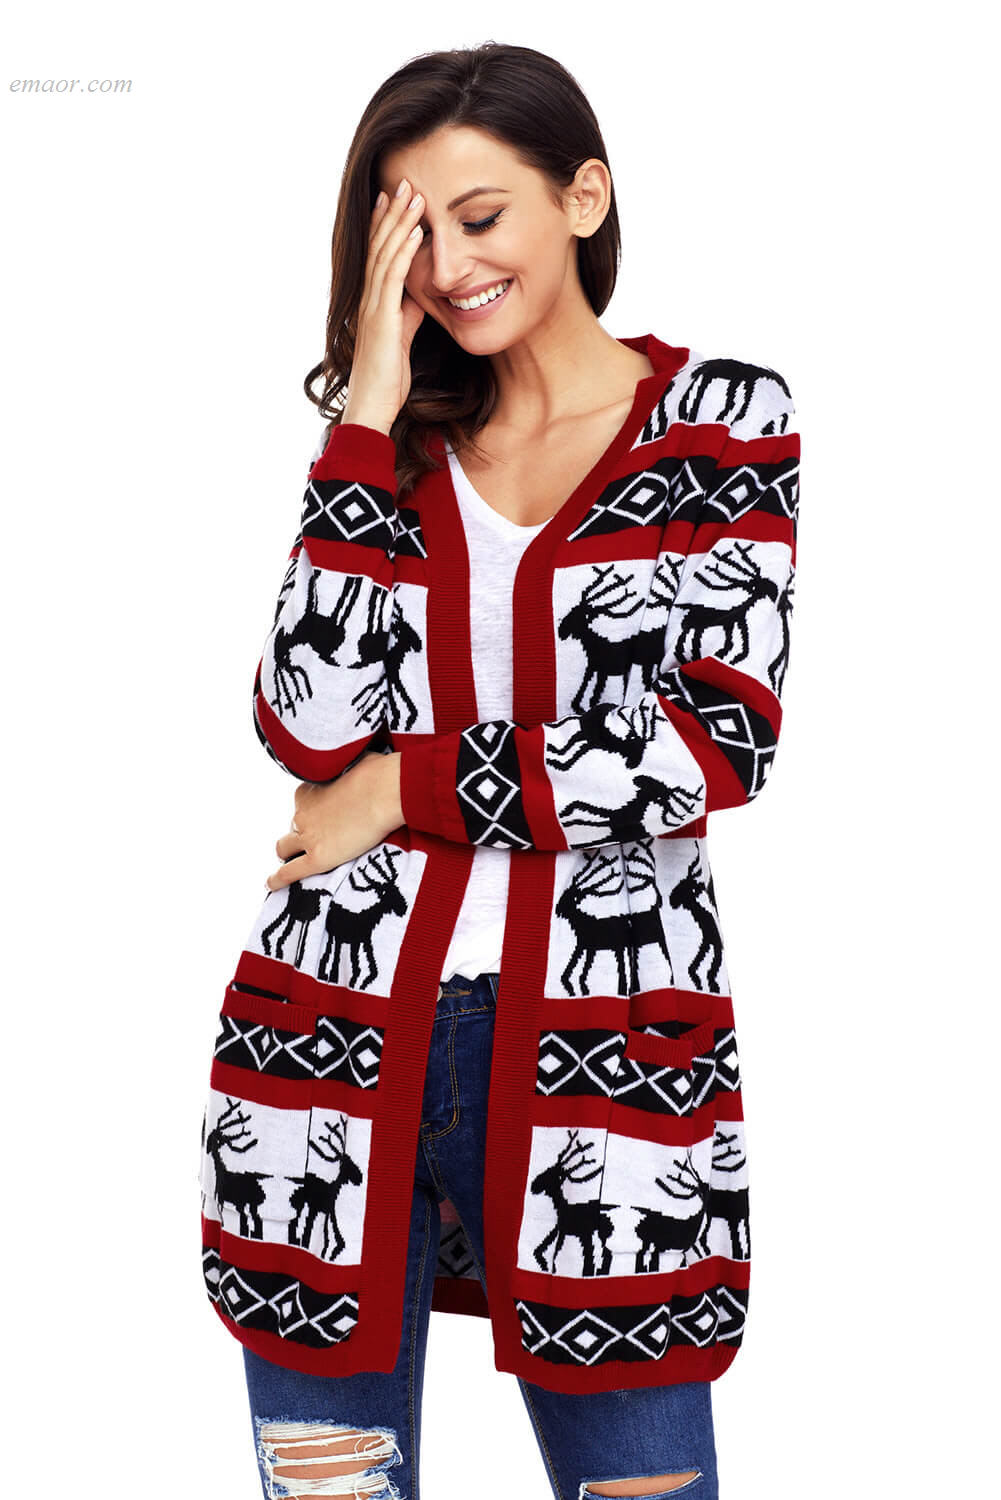 Fashionable Women’s Outerwear Reindeer Geometric Christmas Cardigan Best Selling Outerwear Cooper Designer Outerwear